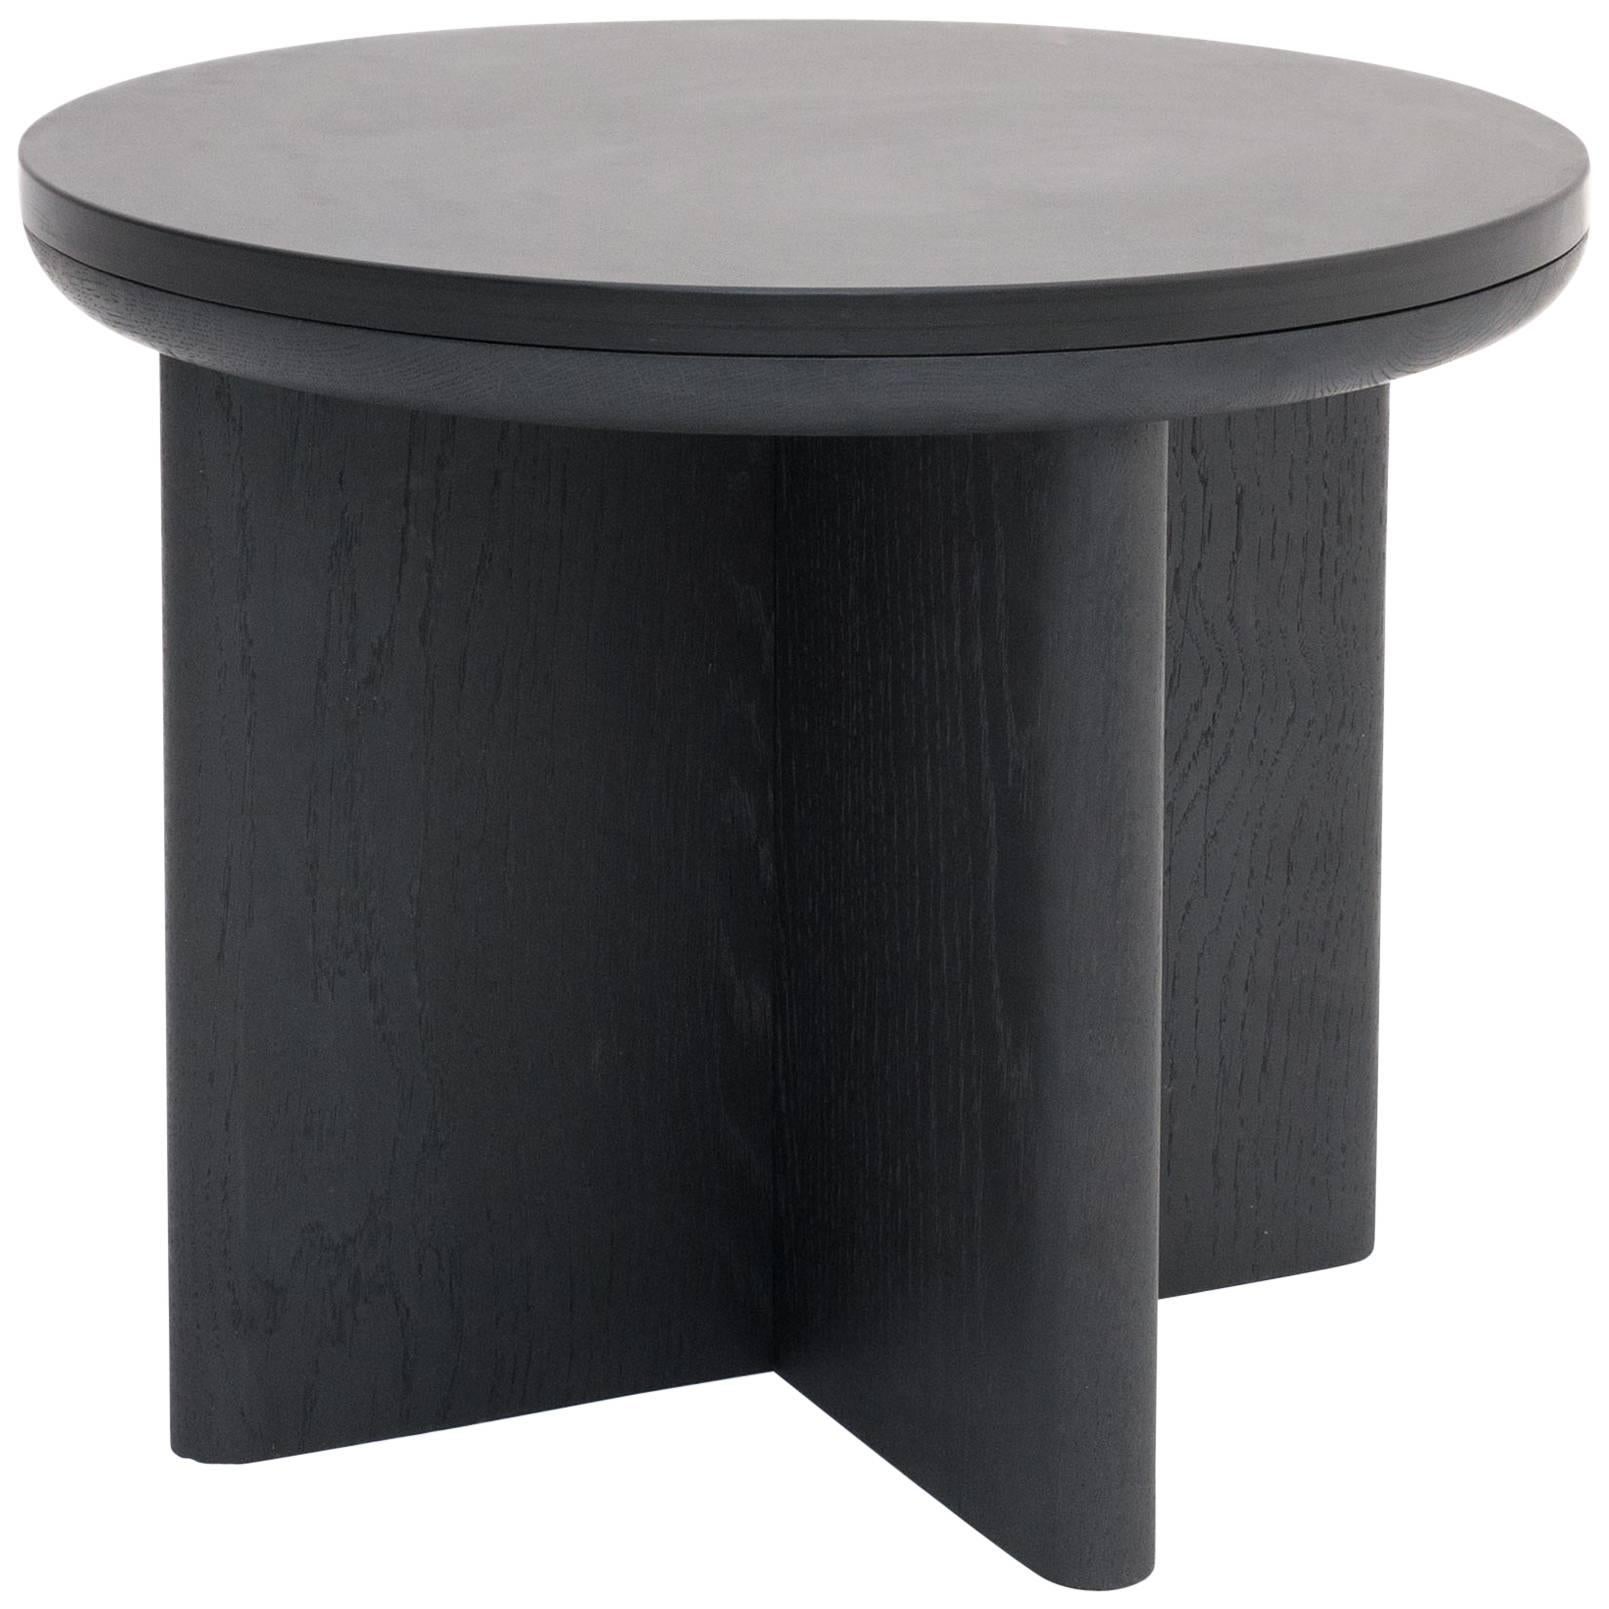 Focus, Solid Black Oak & Welsh Slate Contemporary Side Table by Made in Ratio